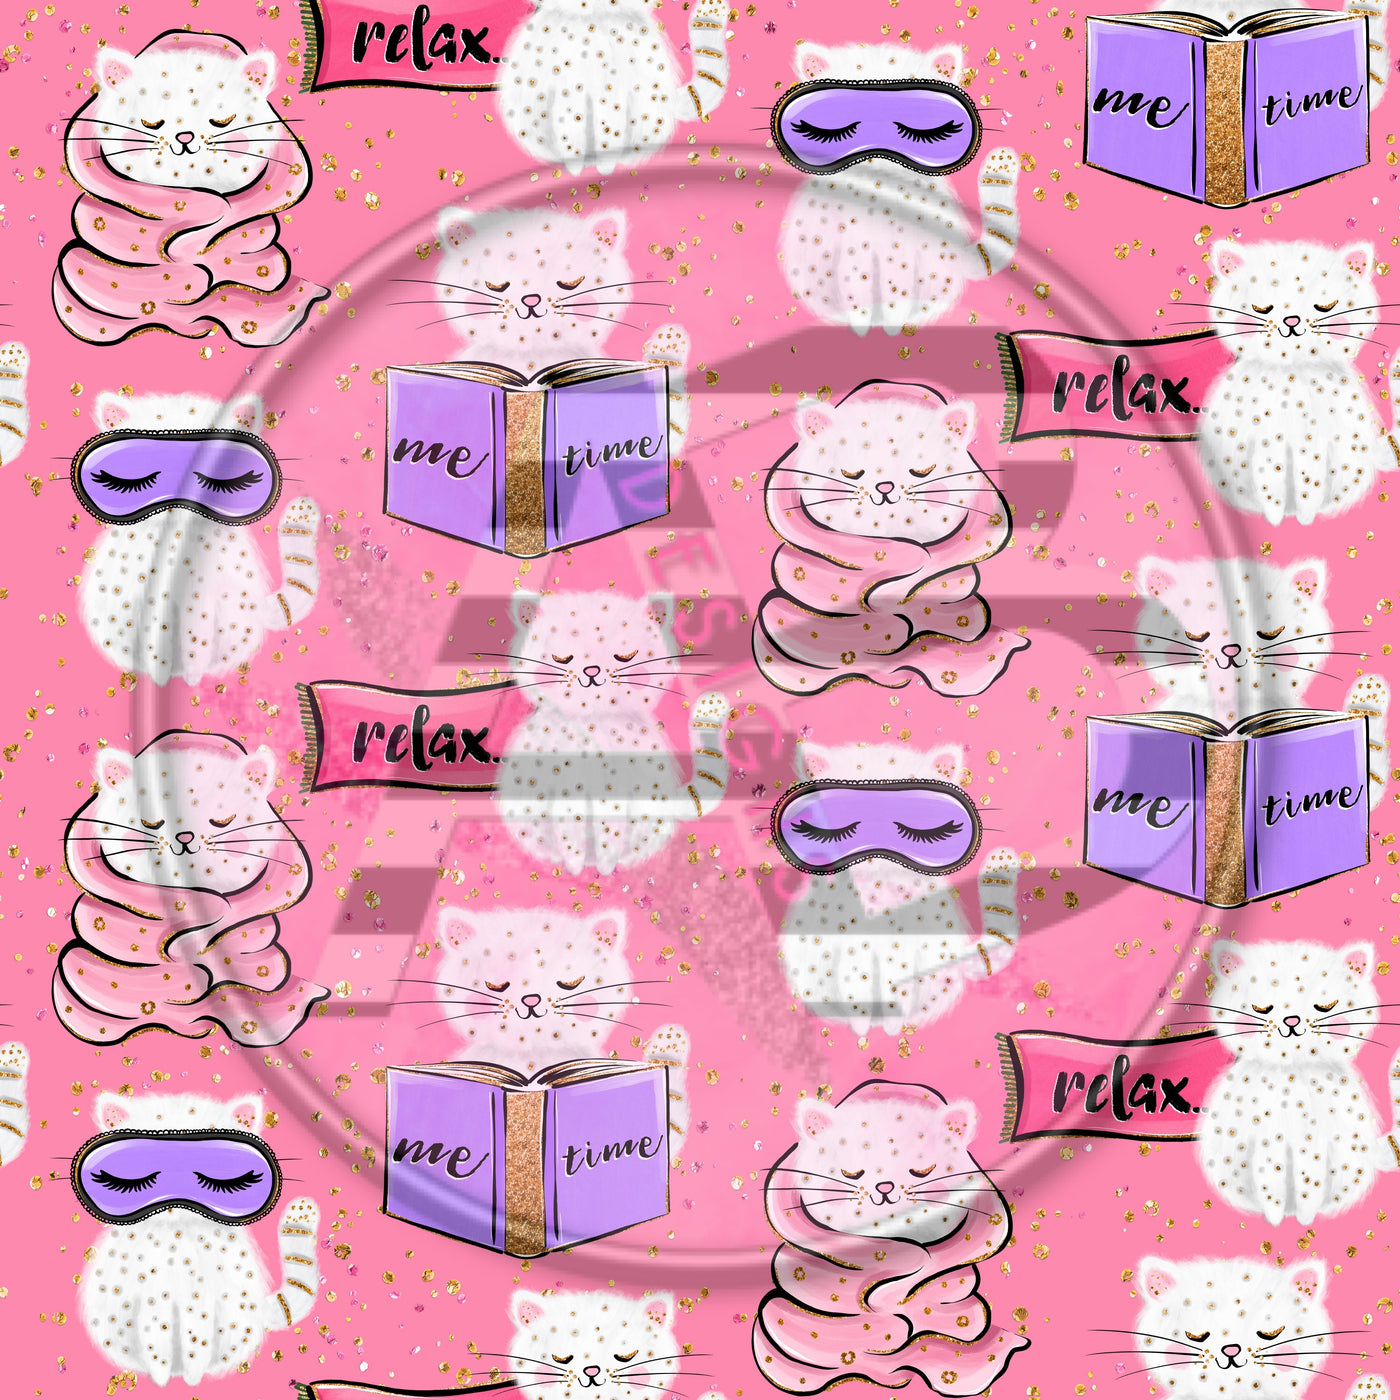 Adhesive Patterned Vinyl - Cats 1564